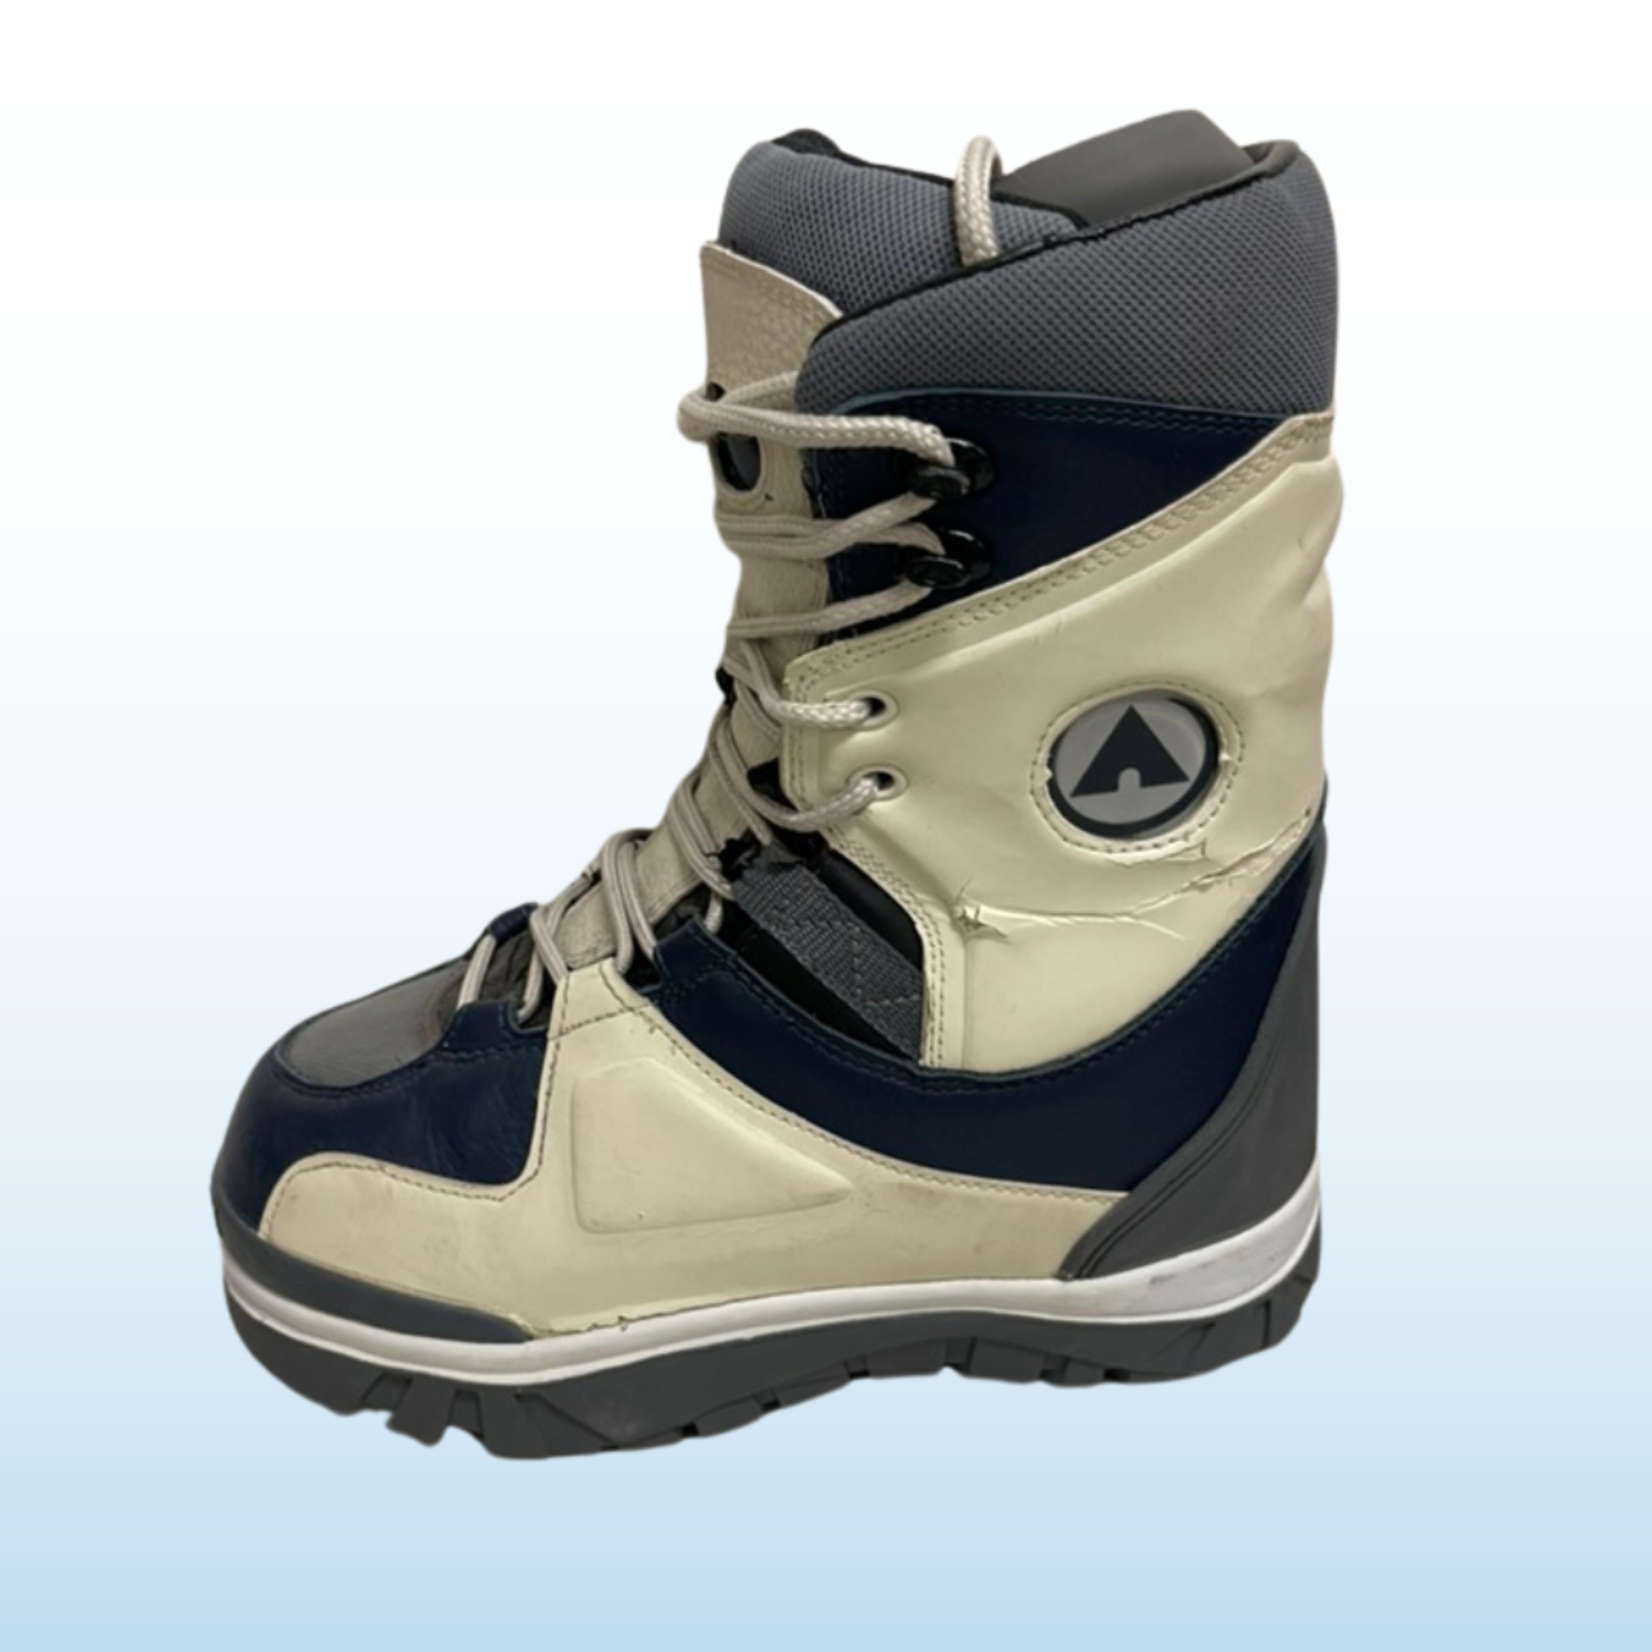 Airwalk Airwalk Sky Snowboard Boots, Size 6 MENS SOLD AS IS NO REFUNDS OR EXCHANGES